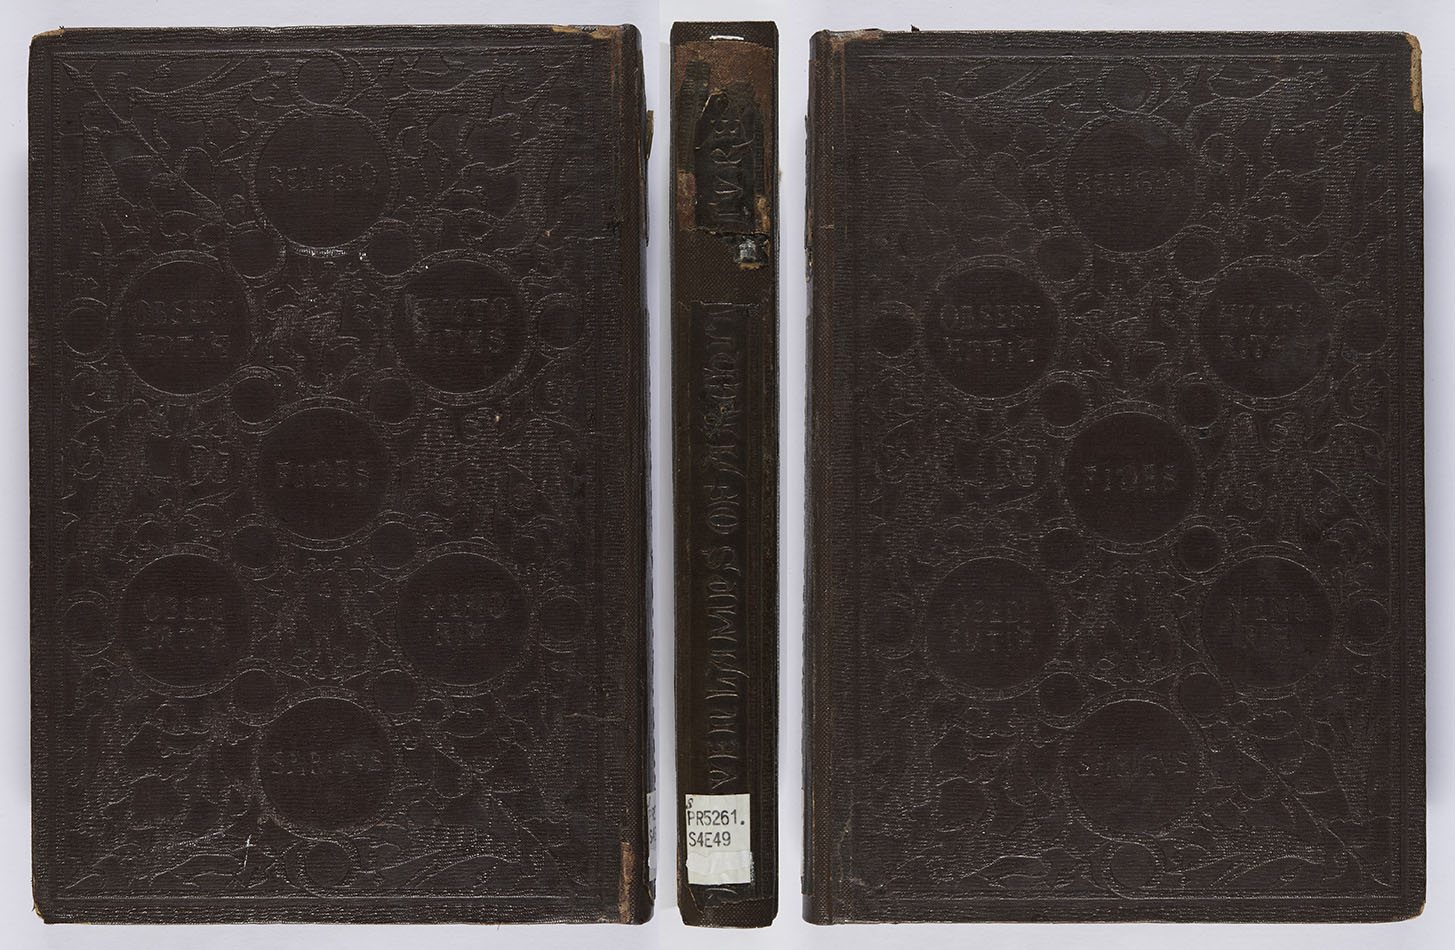 An example of a work whose whole binding is blocked in blind; our copy has had its spine rebacked. John Ruskin, The seven lamps of architecture (London : Smith, Elder, 1849), s PR5261.S4E49.